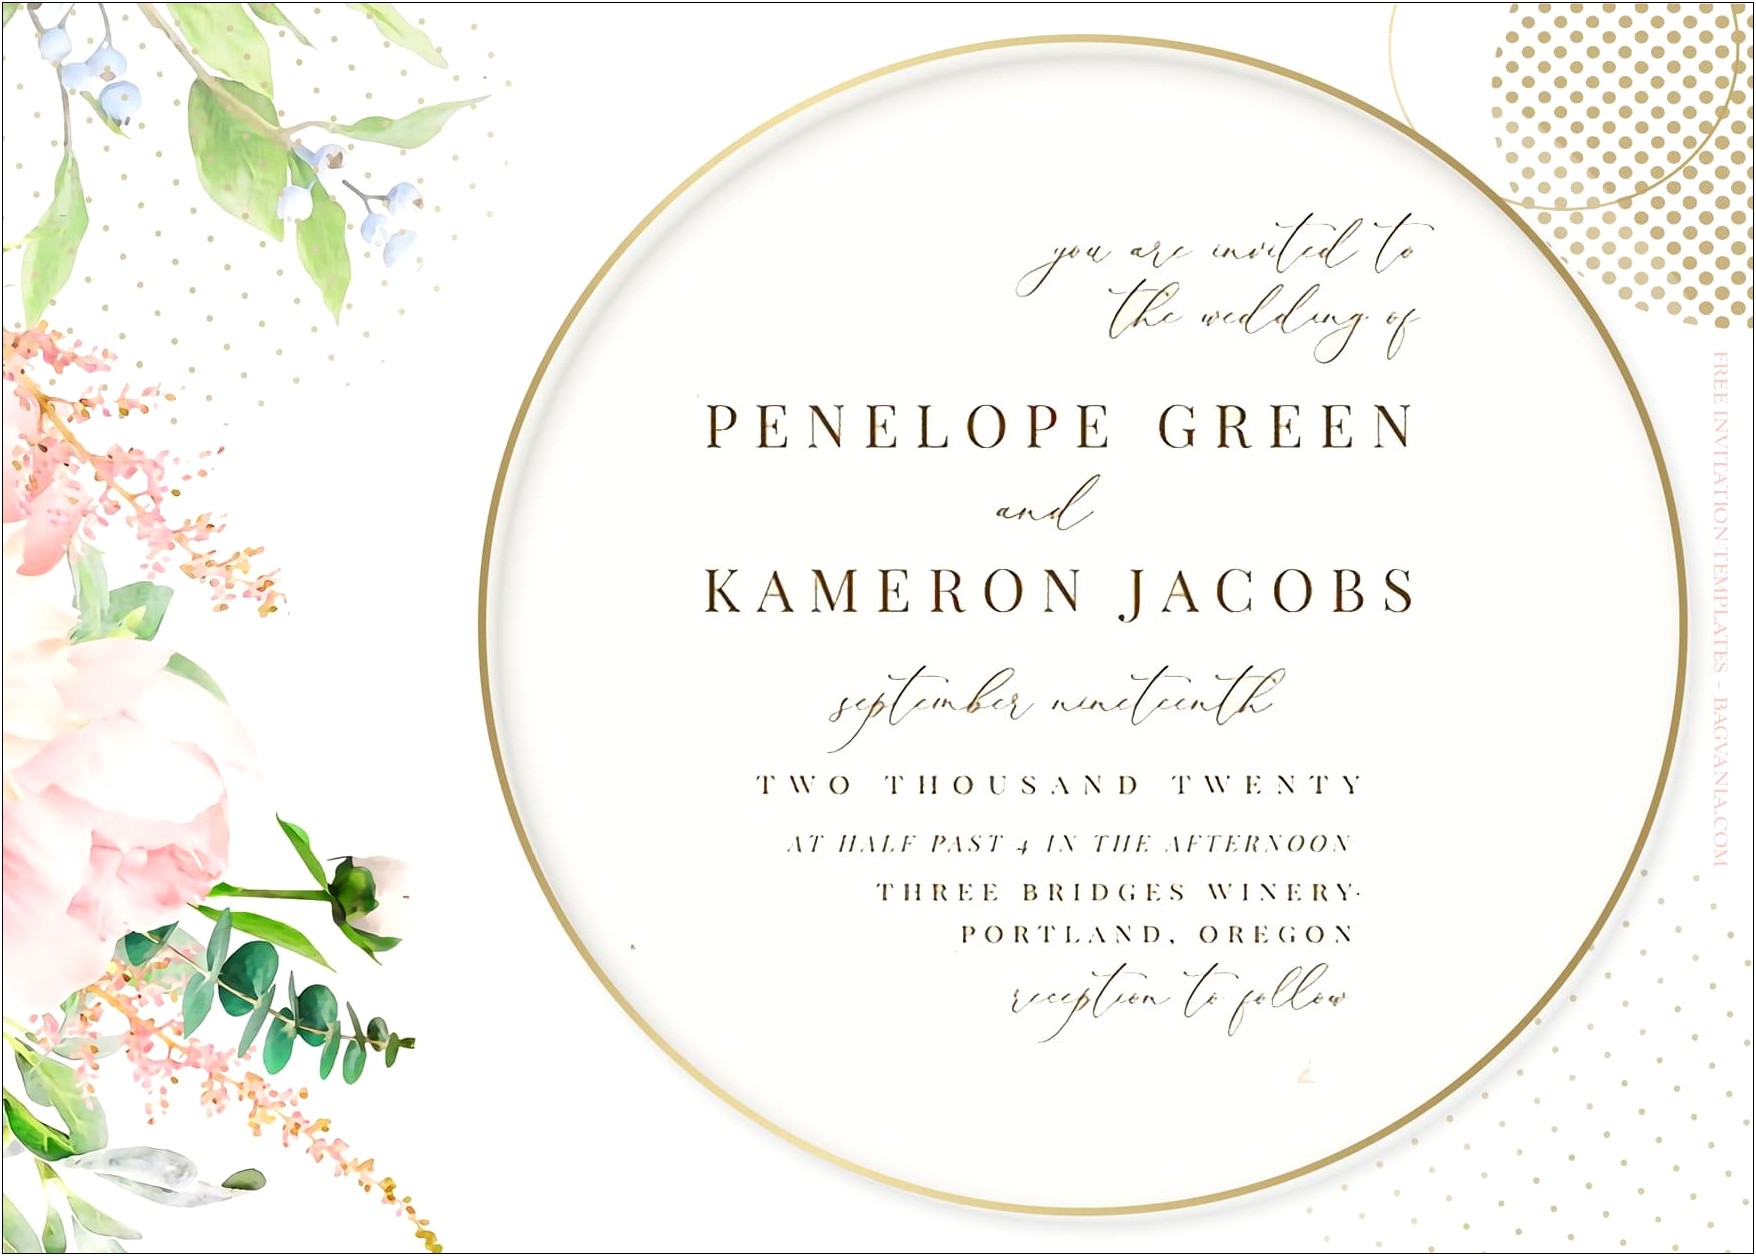 Free Engagement Invitation Templates Online With Photo